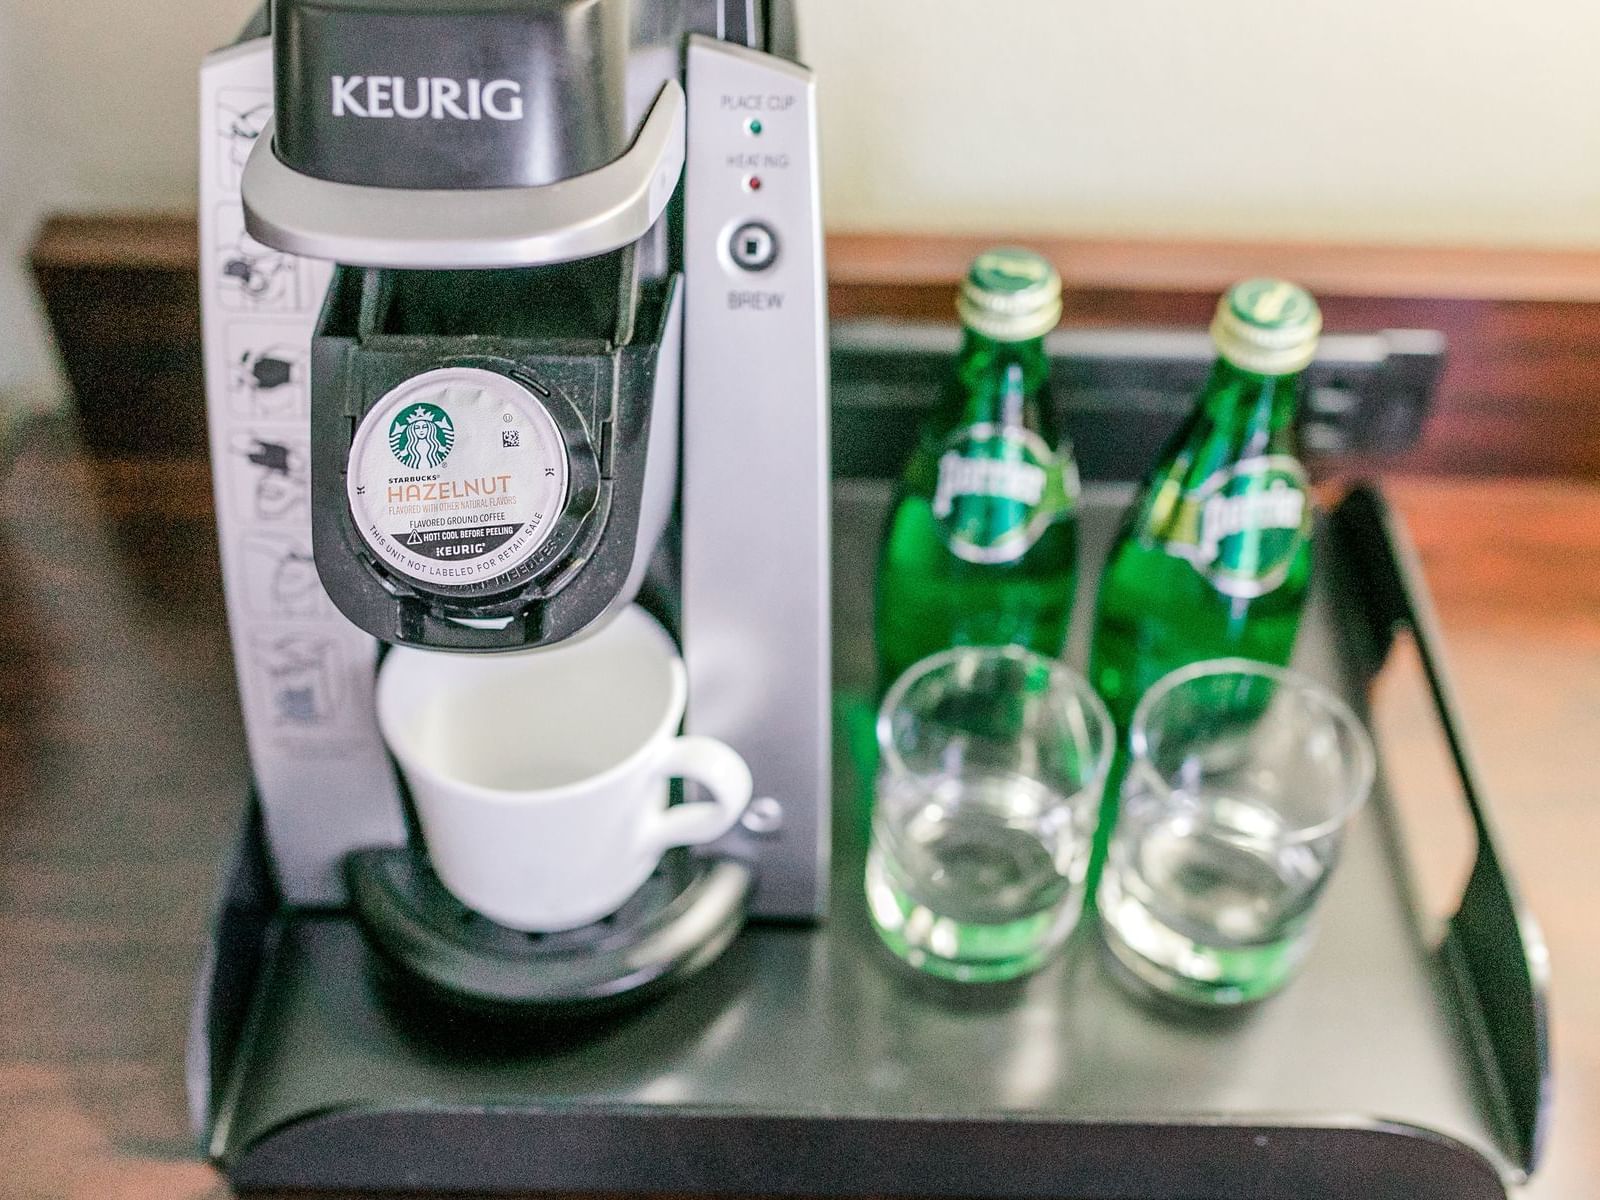 Keurig Coffee Maker with mug, Perrier water, and glasses on a tray.